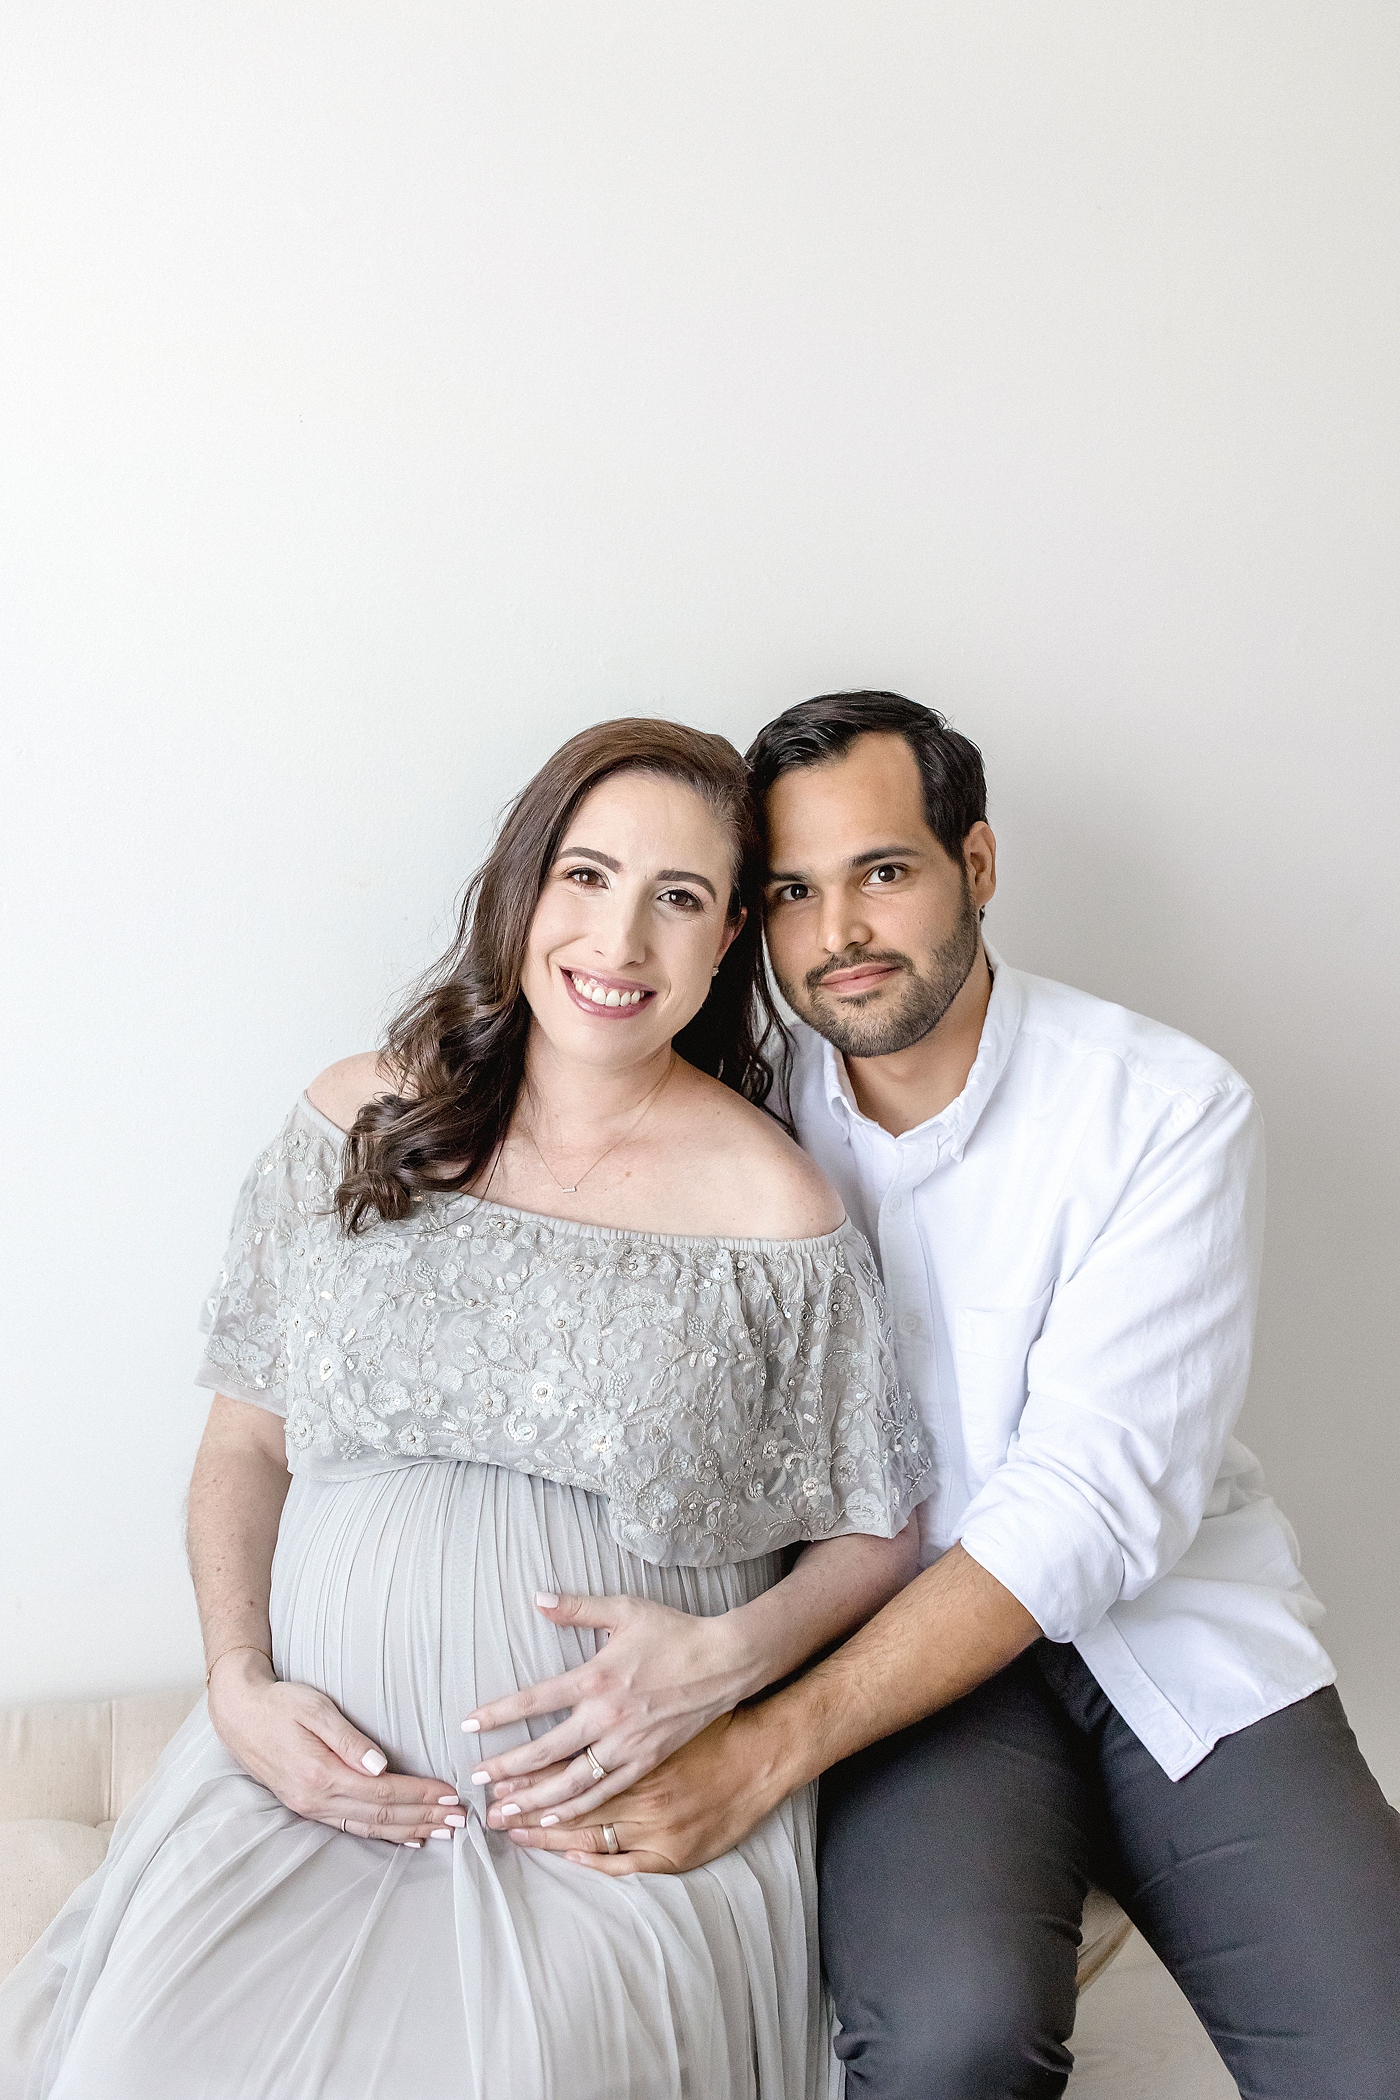 Expecting couple smile for photographing during maternity studio session before going to El Farito Beach Miami FL. Photo by Ivanna Vidal Photography.